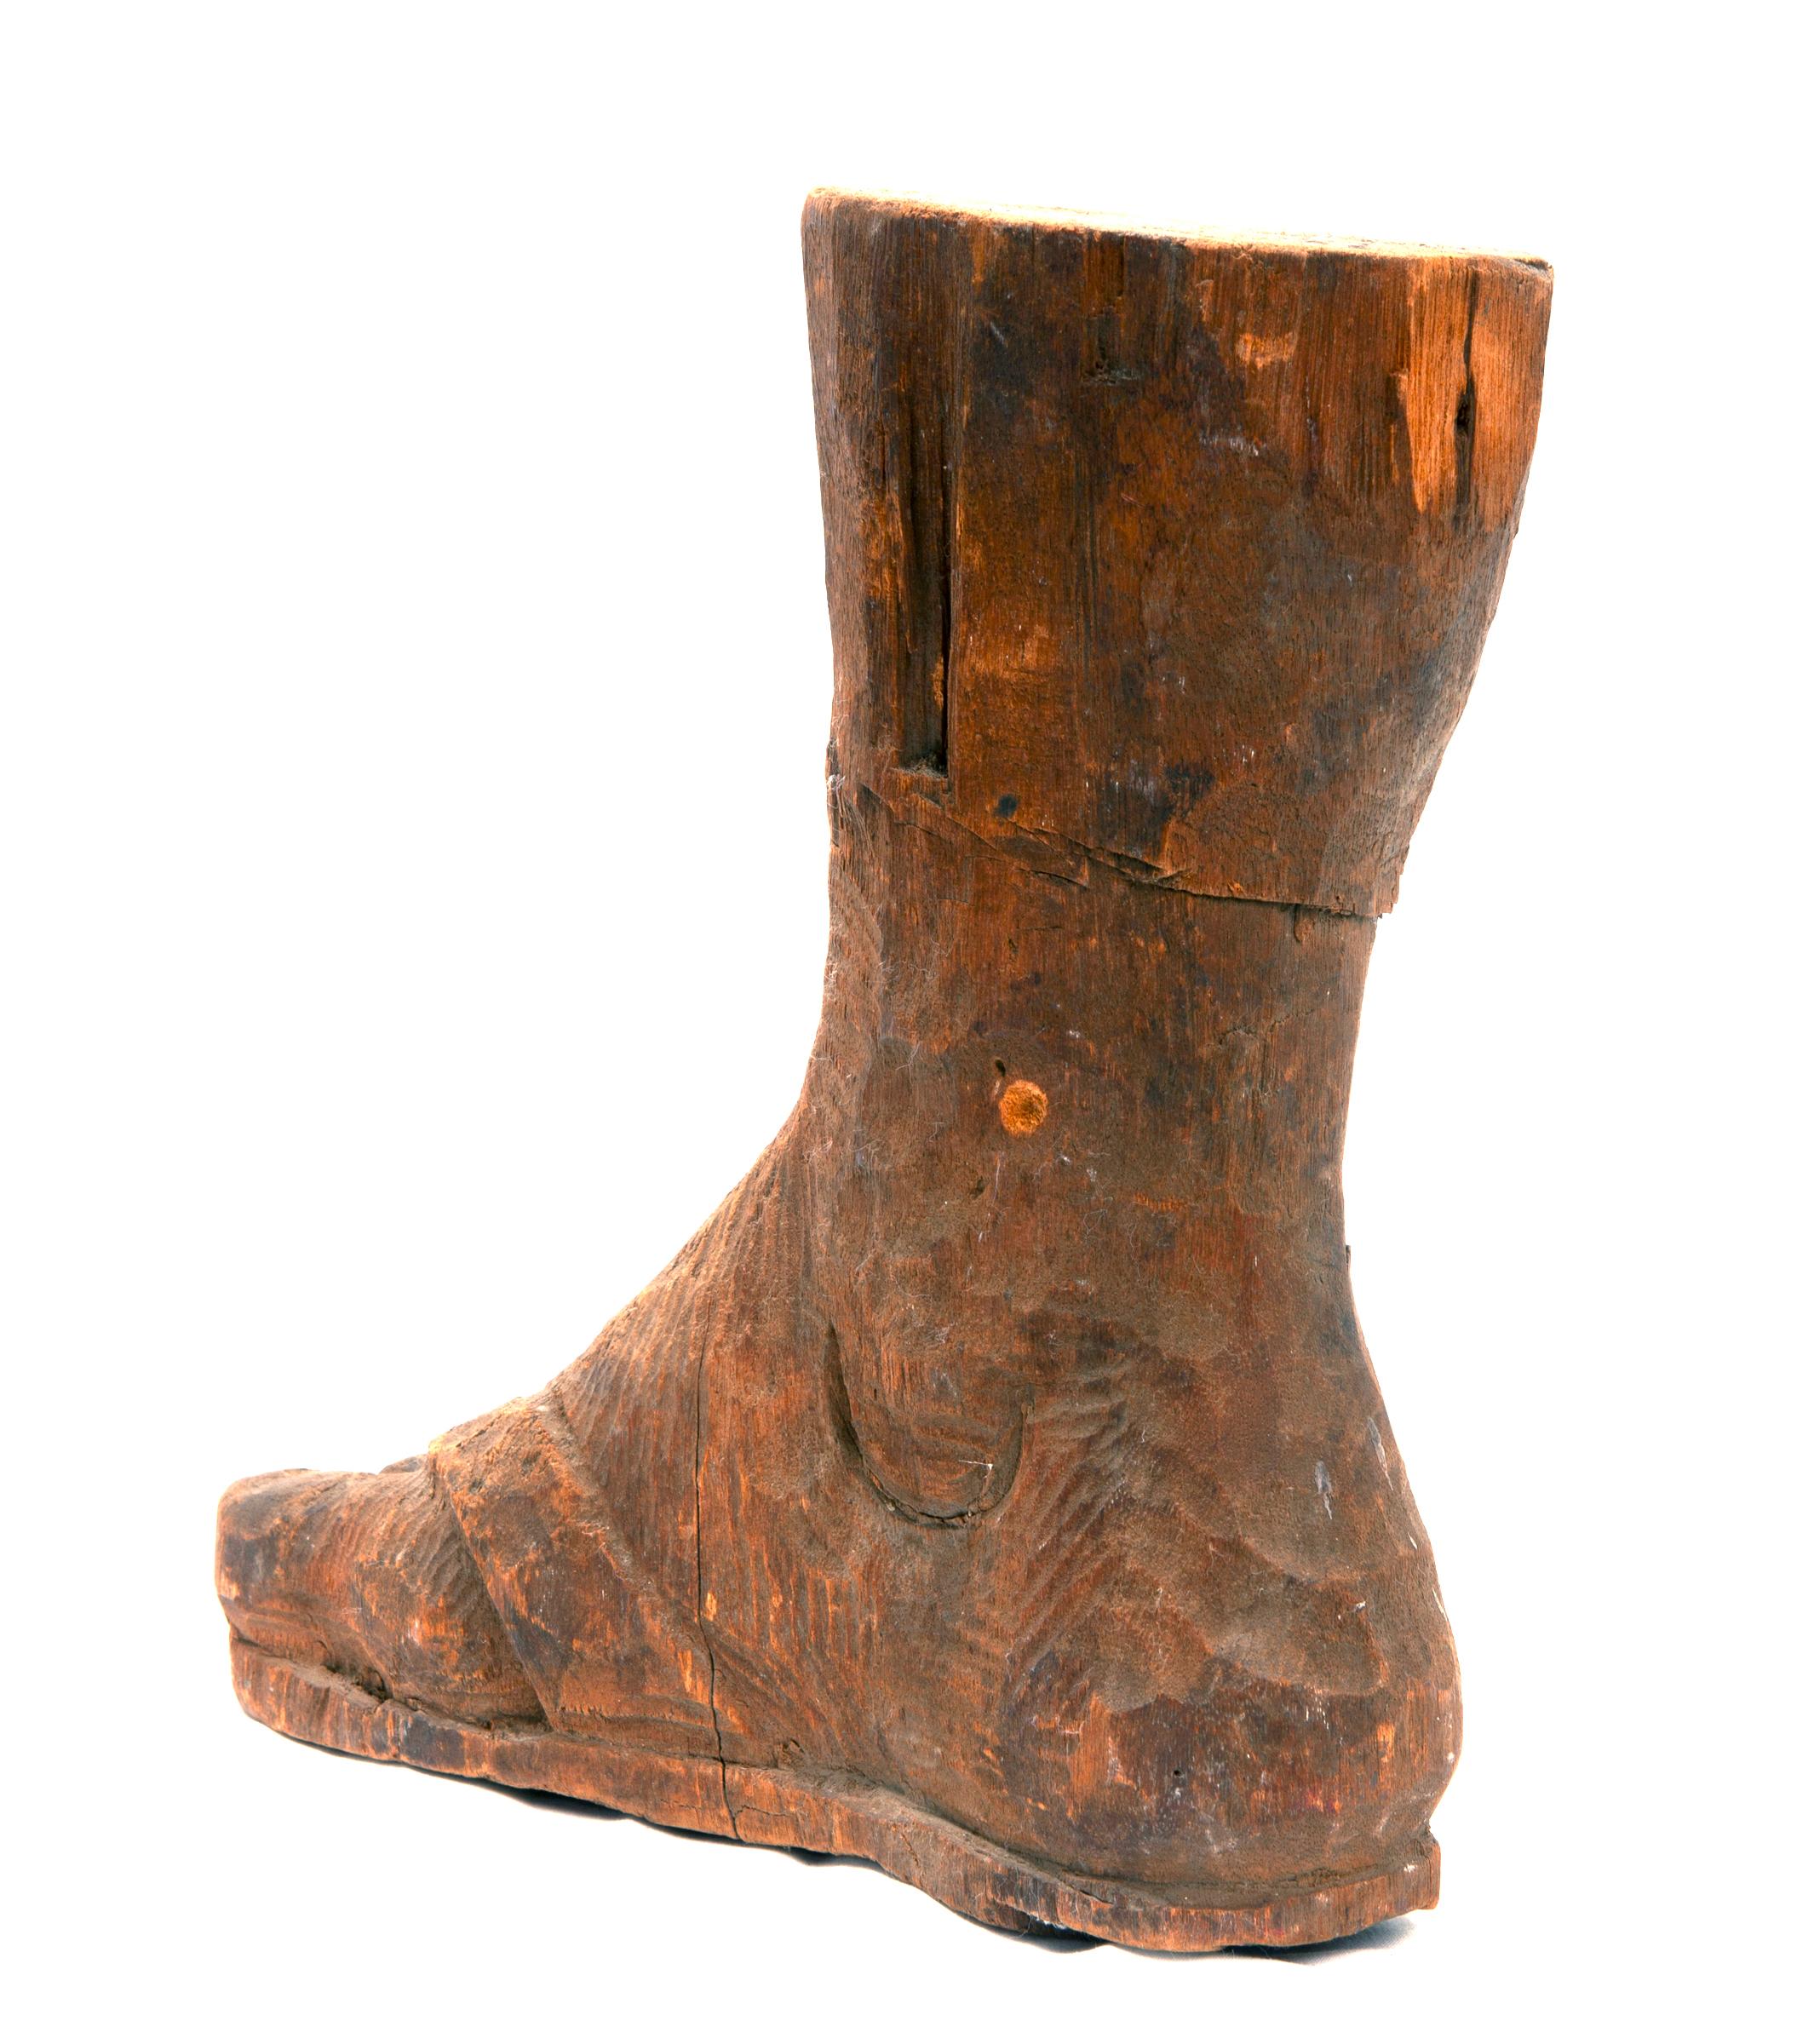 Hand-Carved European Antique Artifact Hand Carved Wooden Foot For Sale